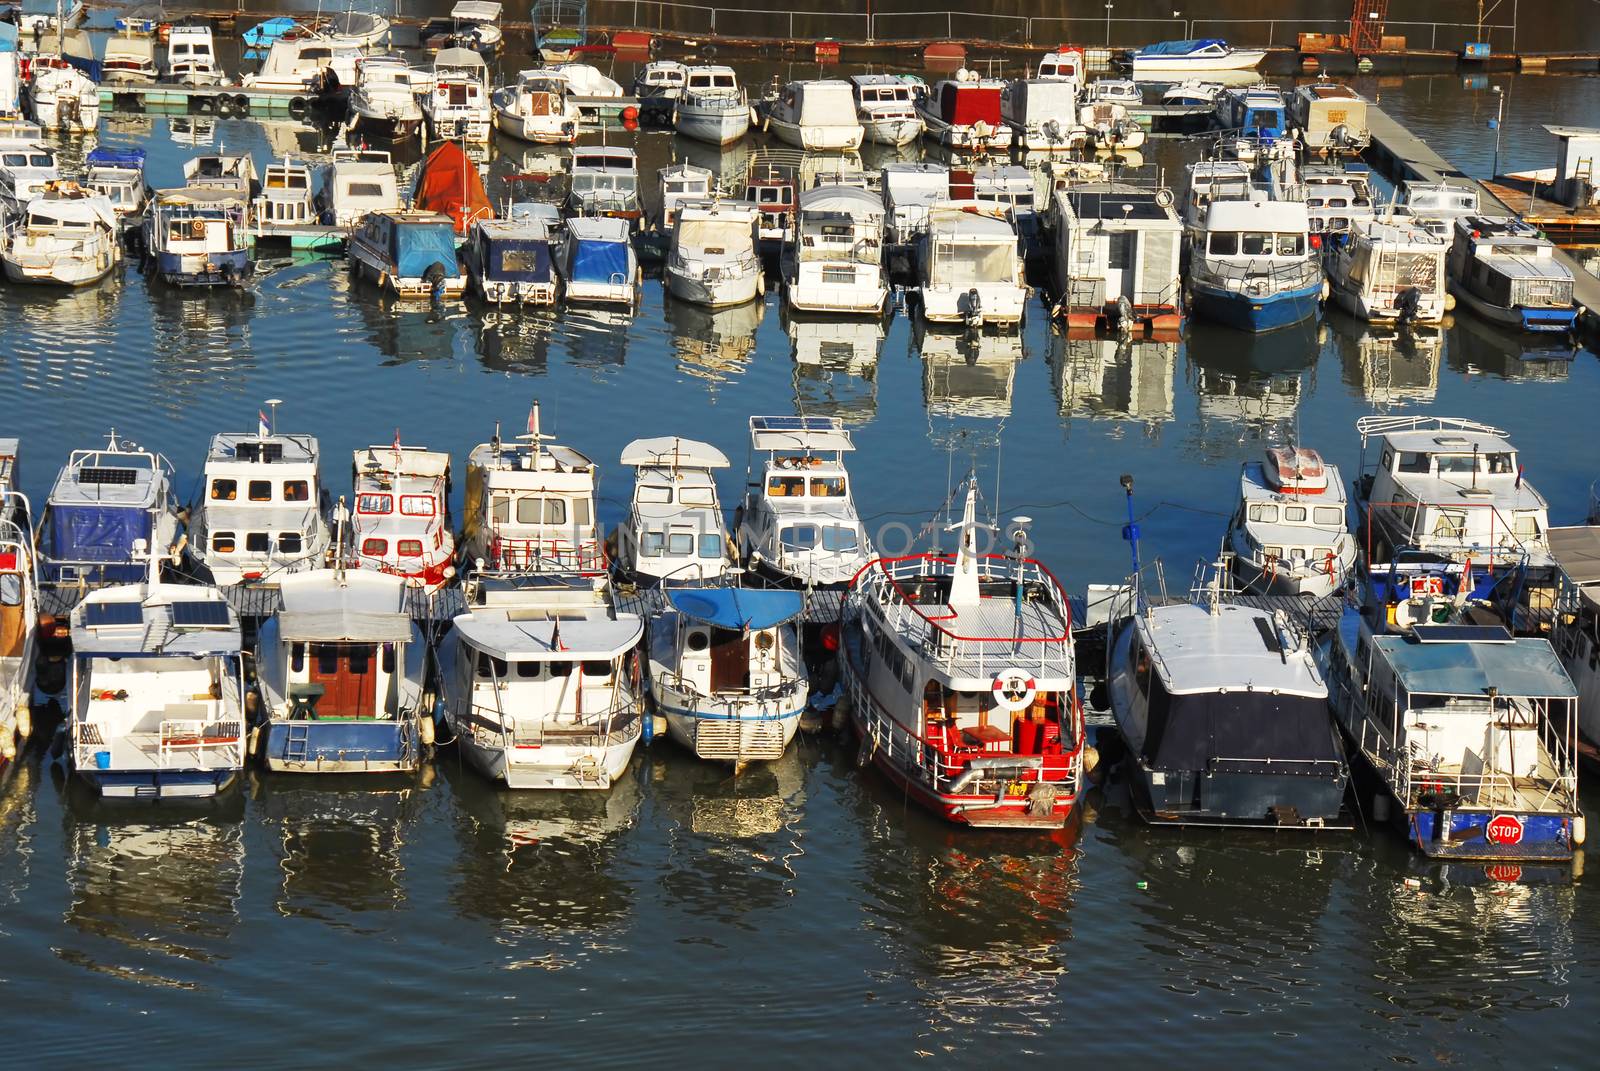 Various parked boats in row by simply